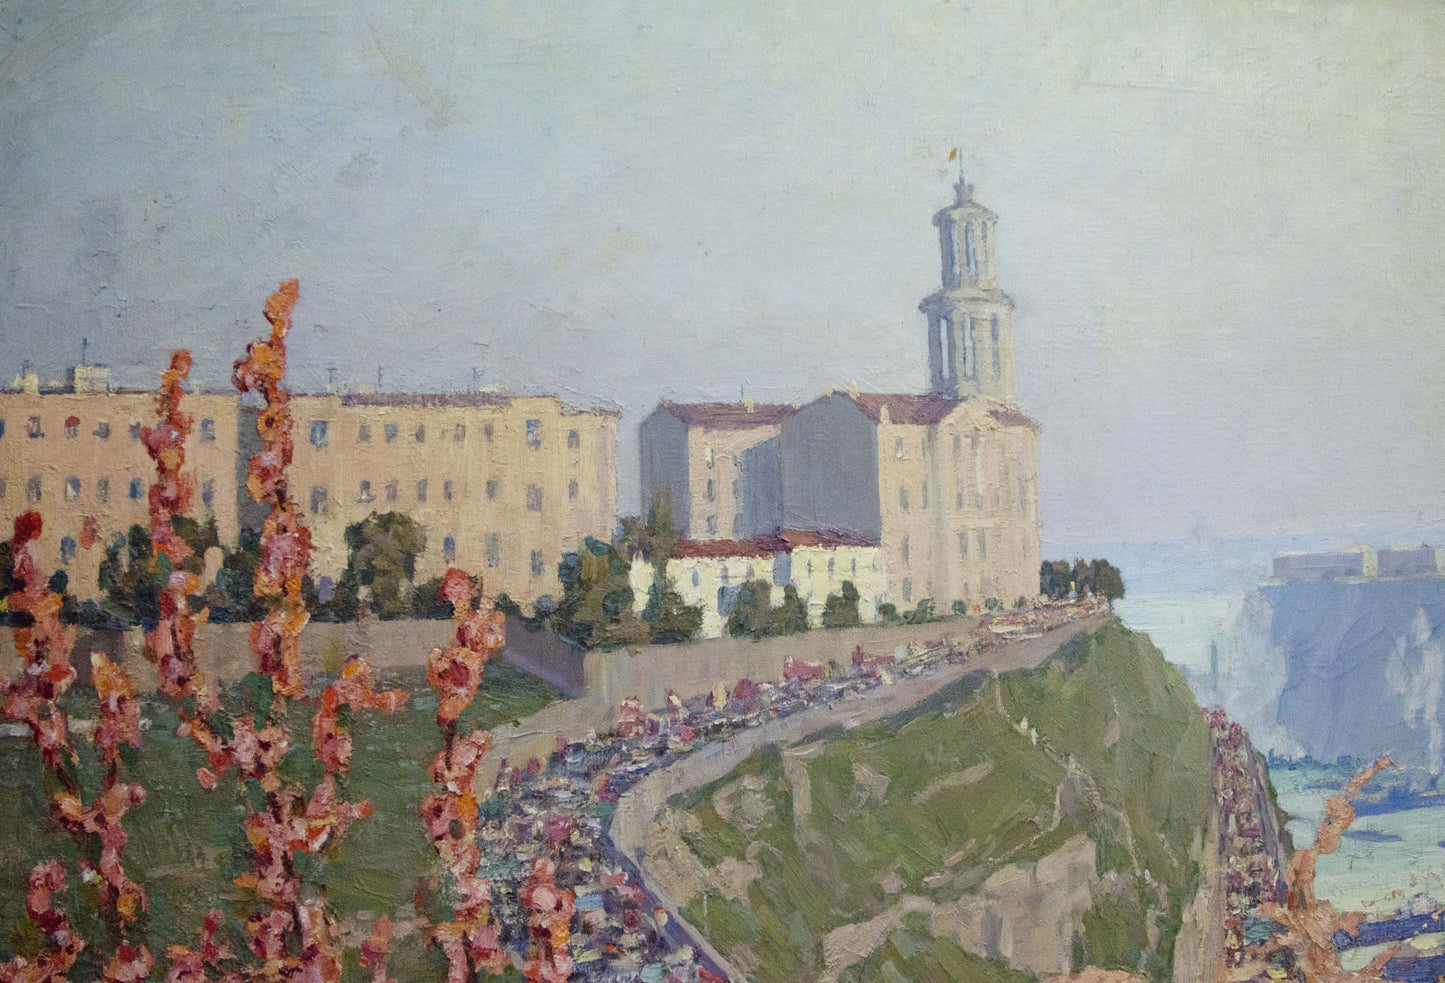 Sergey Sidorovich Vladimirov's oil painting captures the essence of May Day in Sevastopol